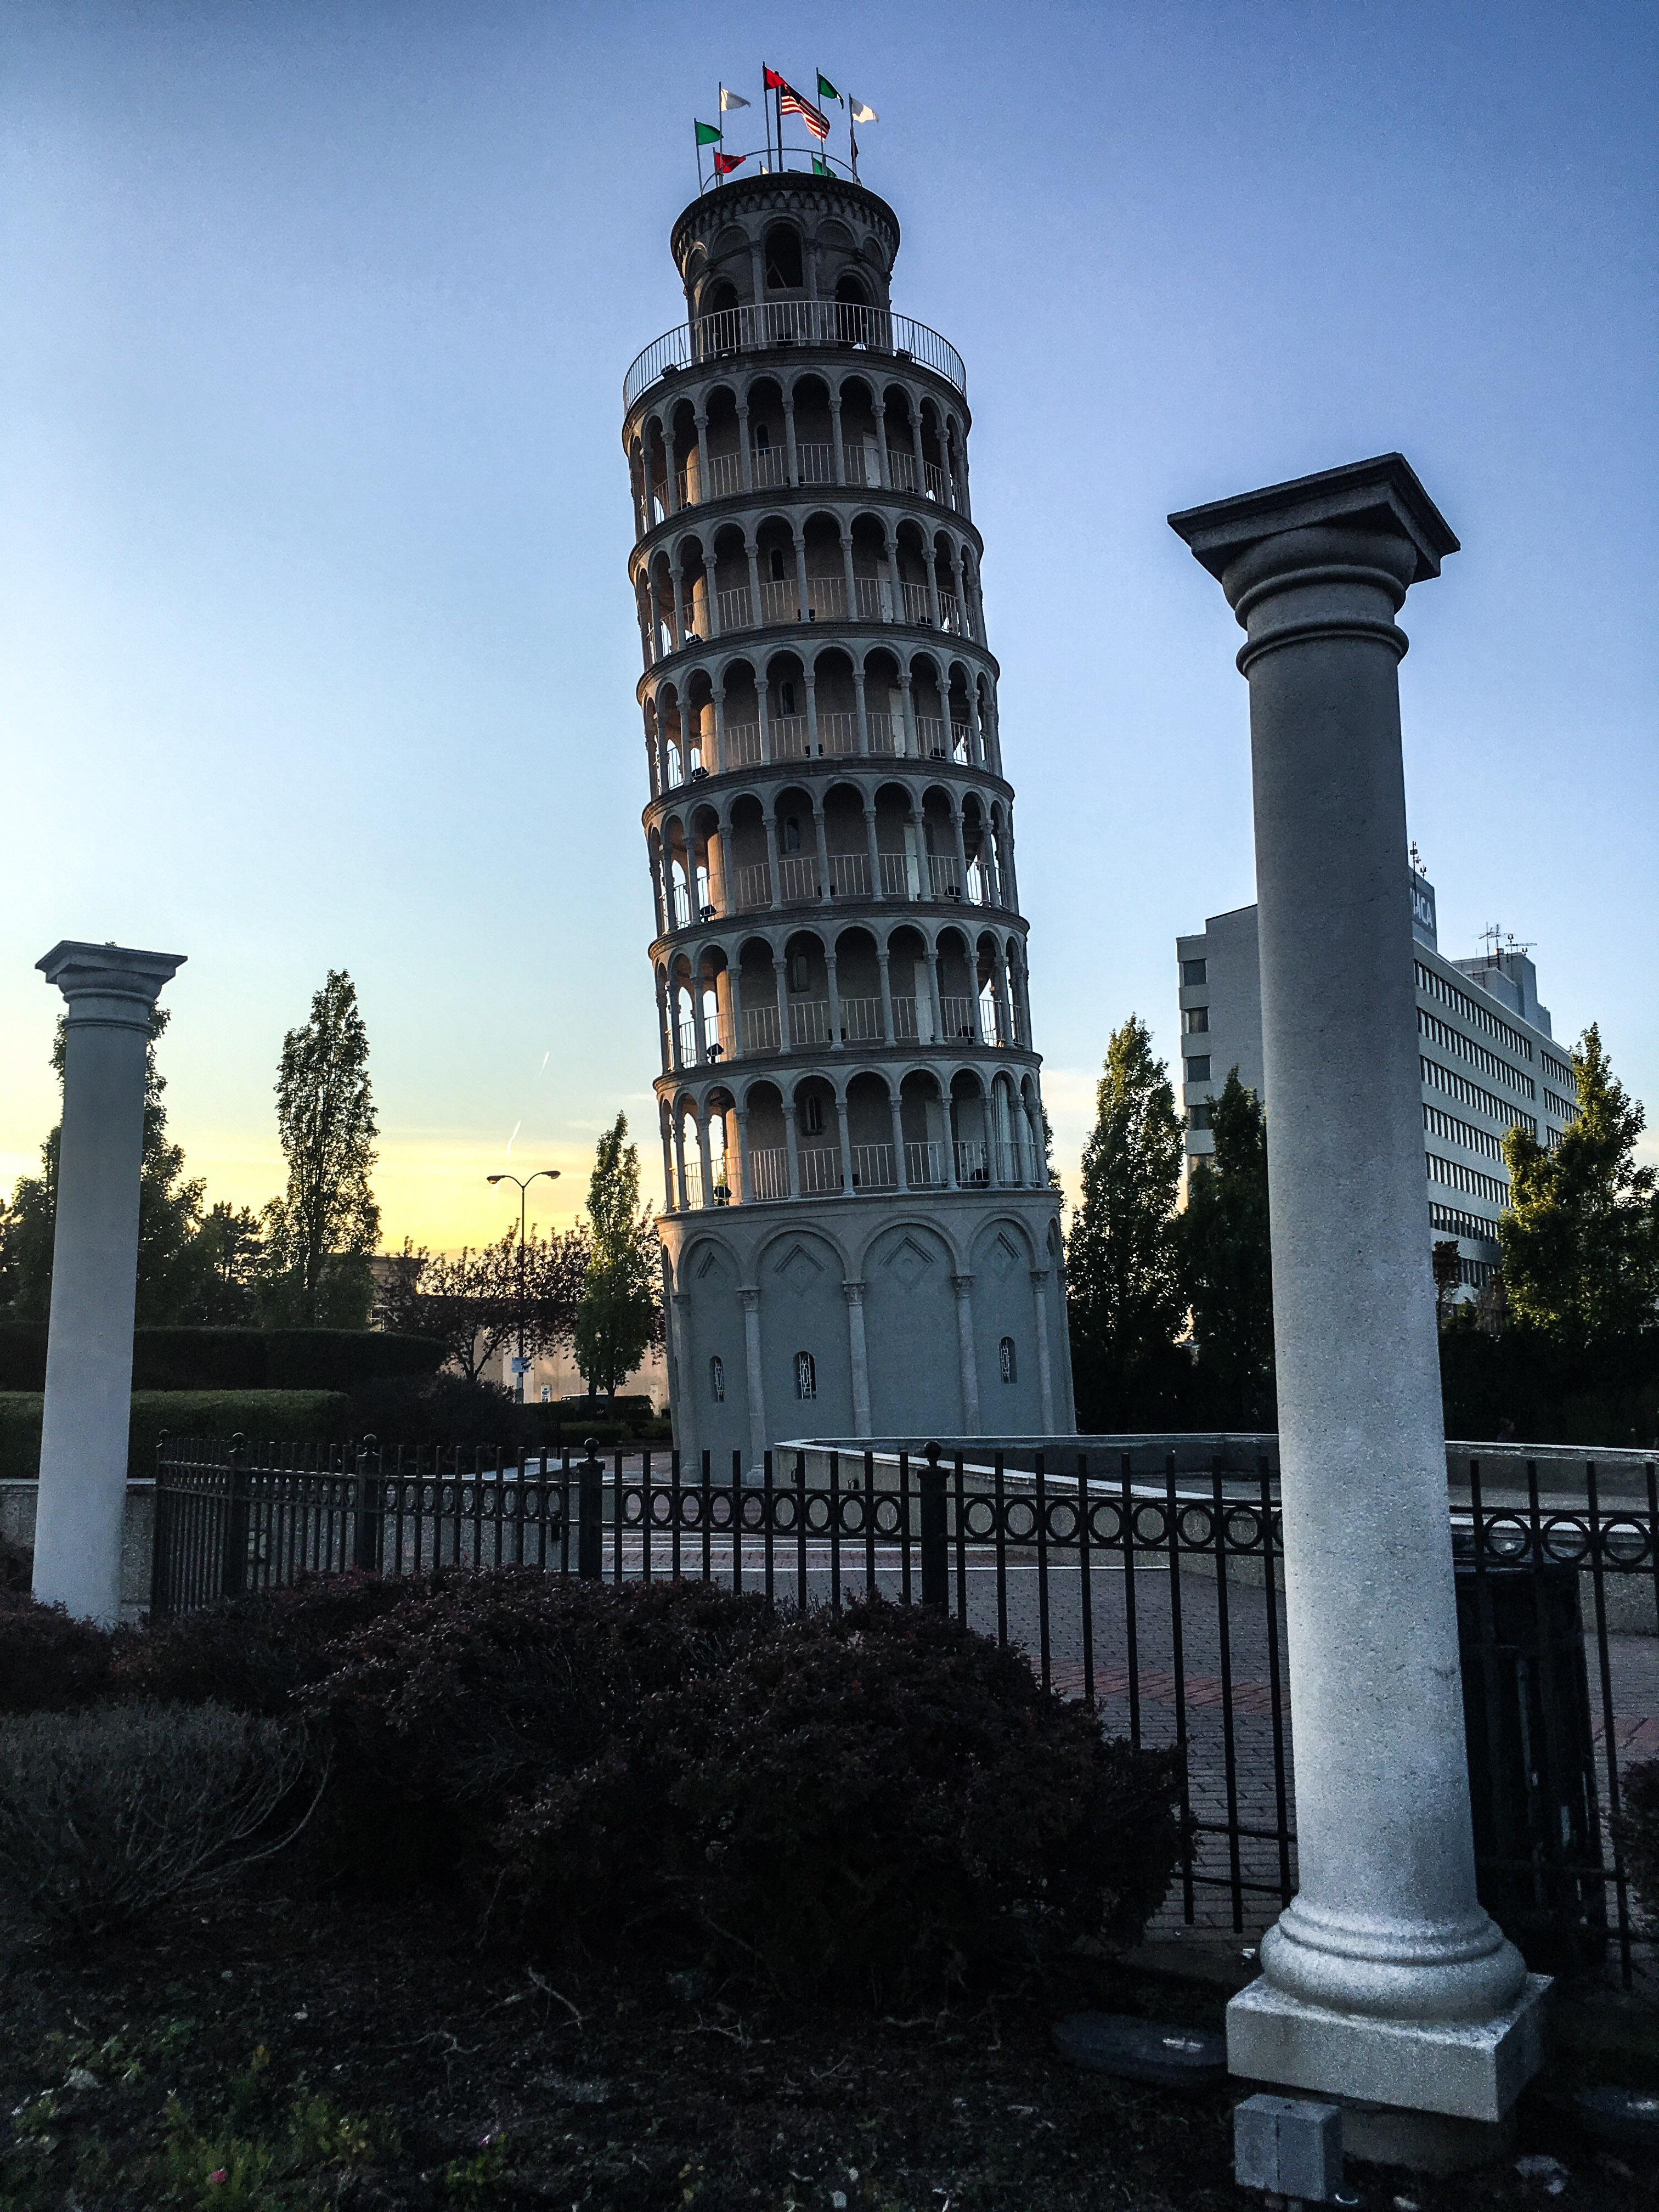 a tower with columns and a fence